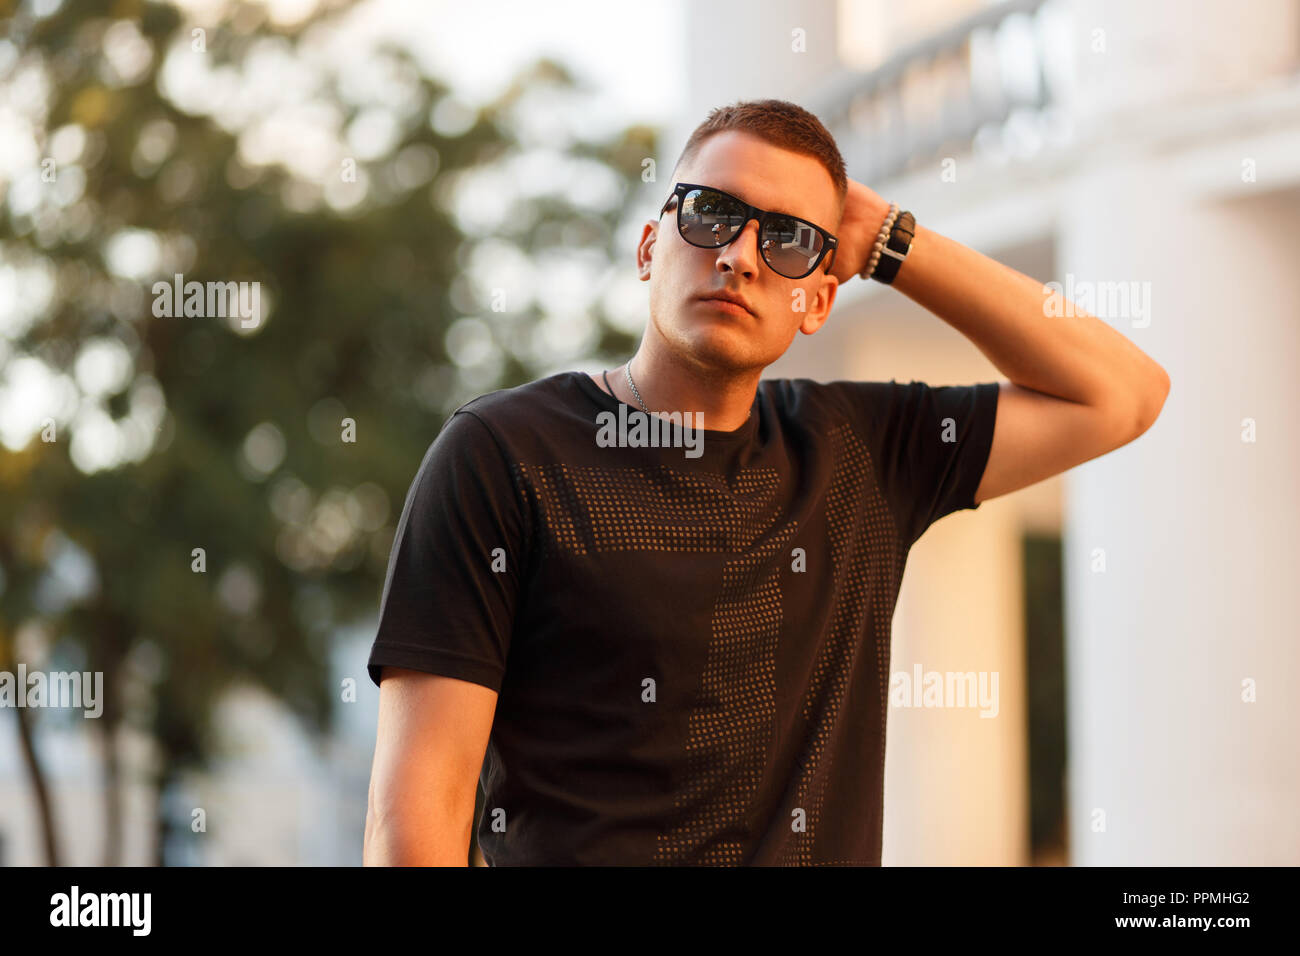 Stylish handsome man with sunglasses in a fashionable black T-shirt in the city at sunset Stock Photo